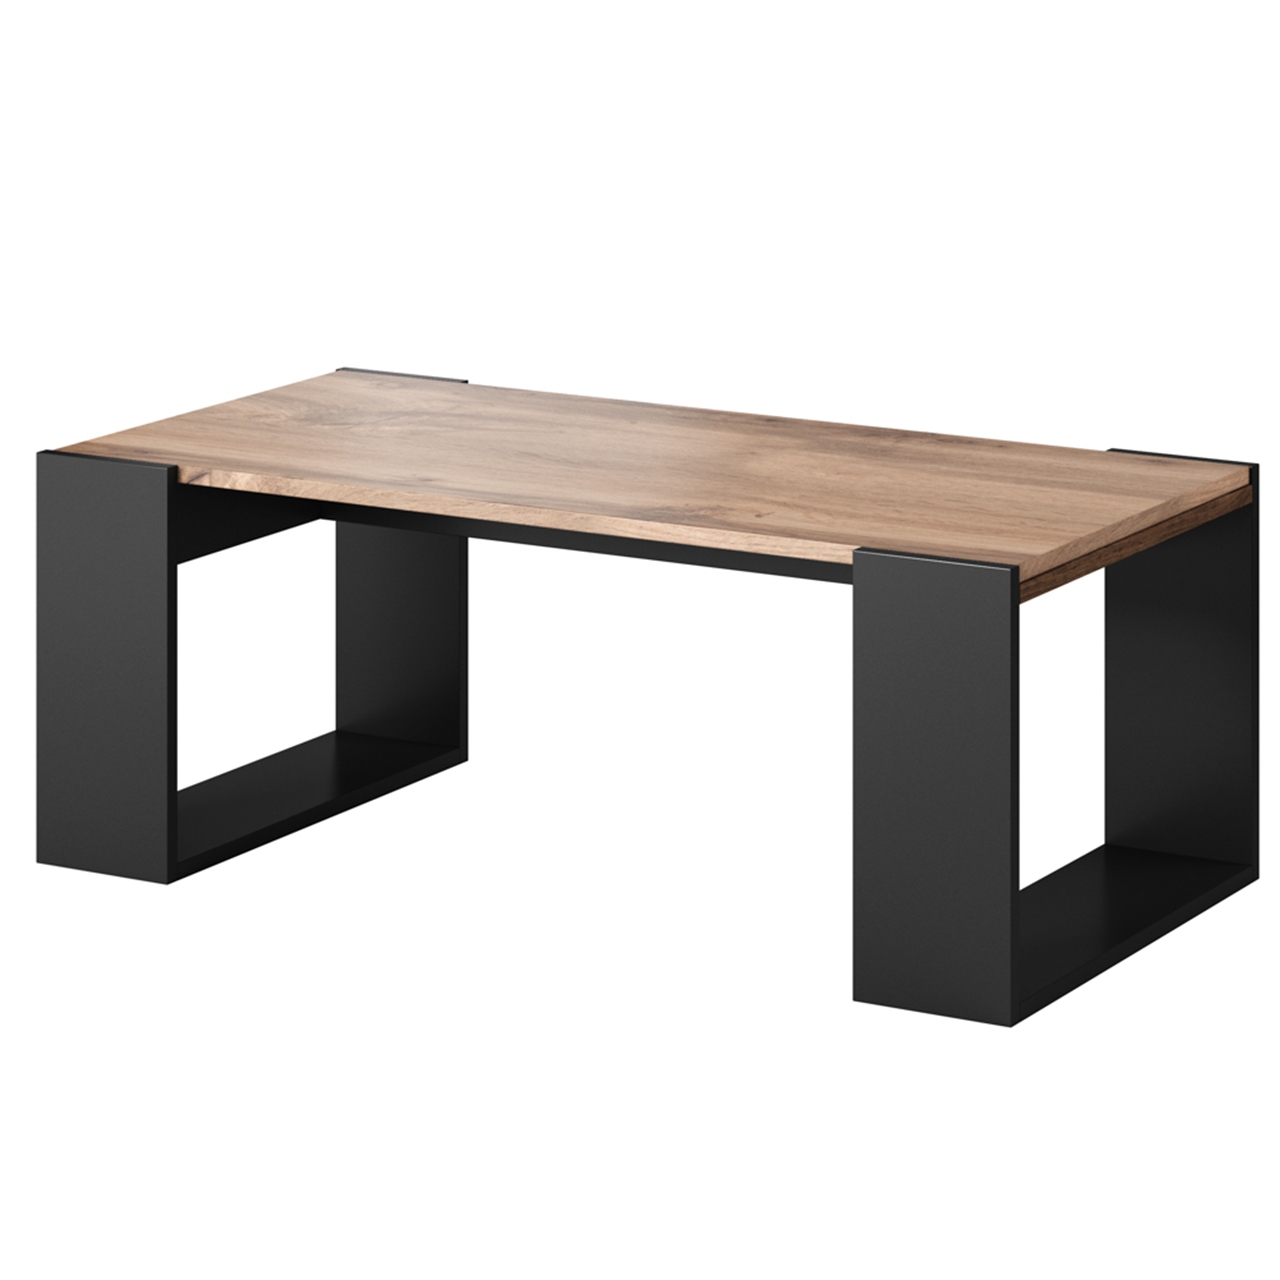 Coffee table WOOD wotan oak / anthracite